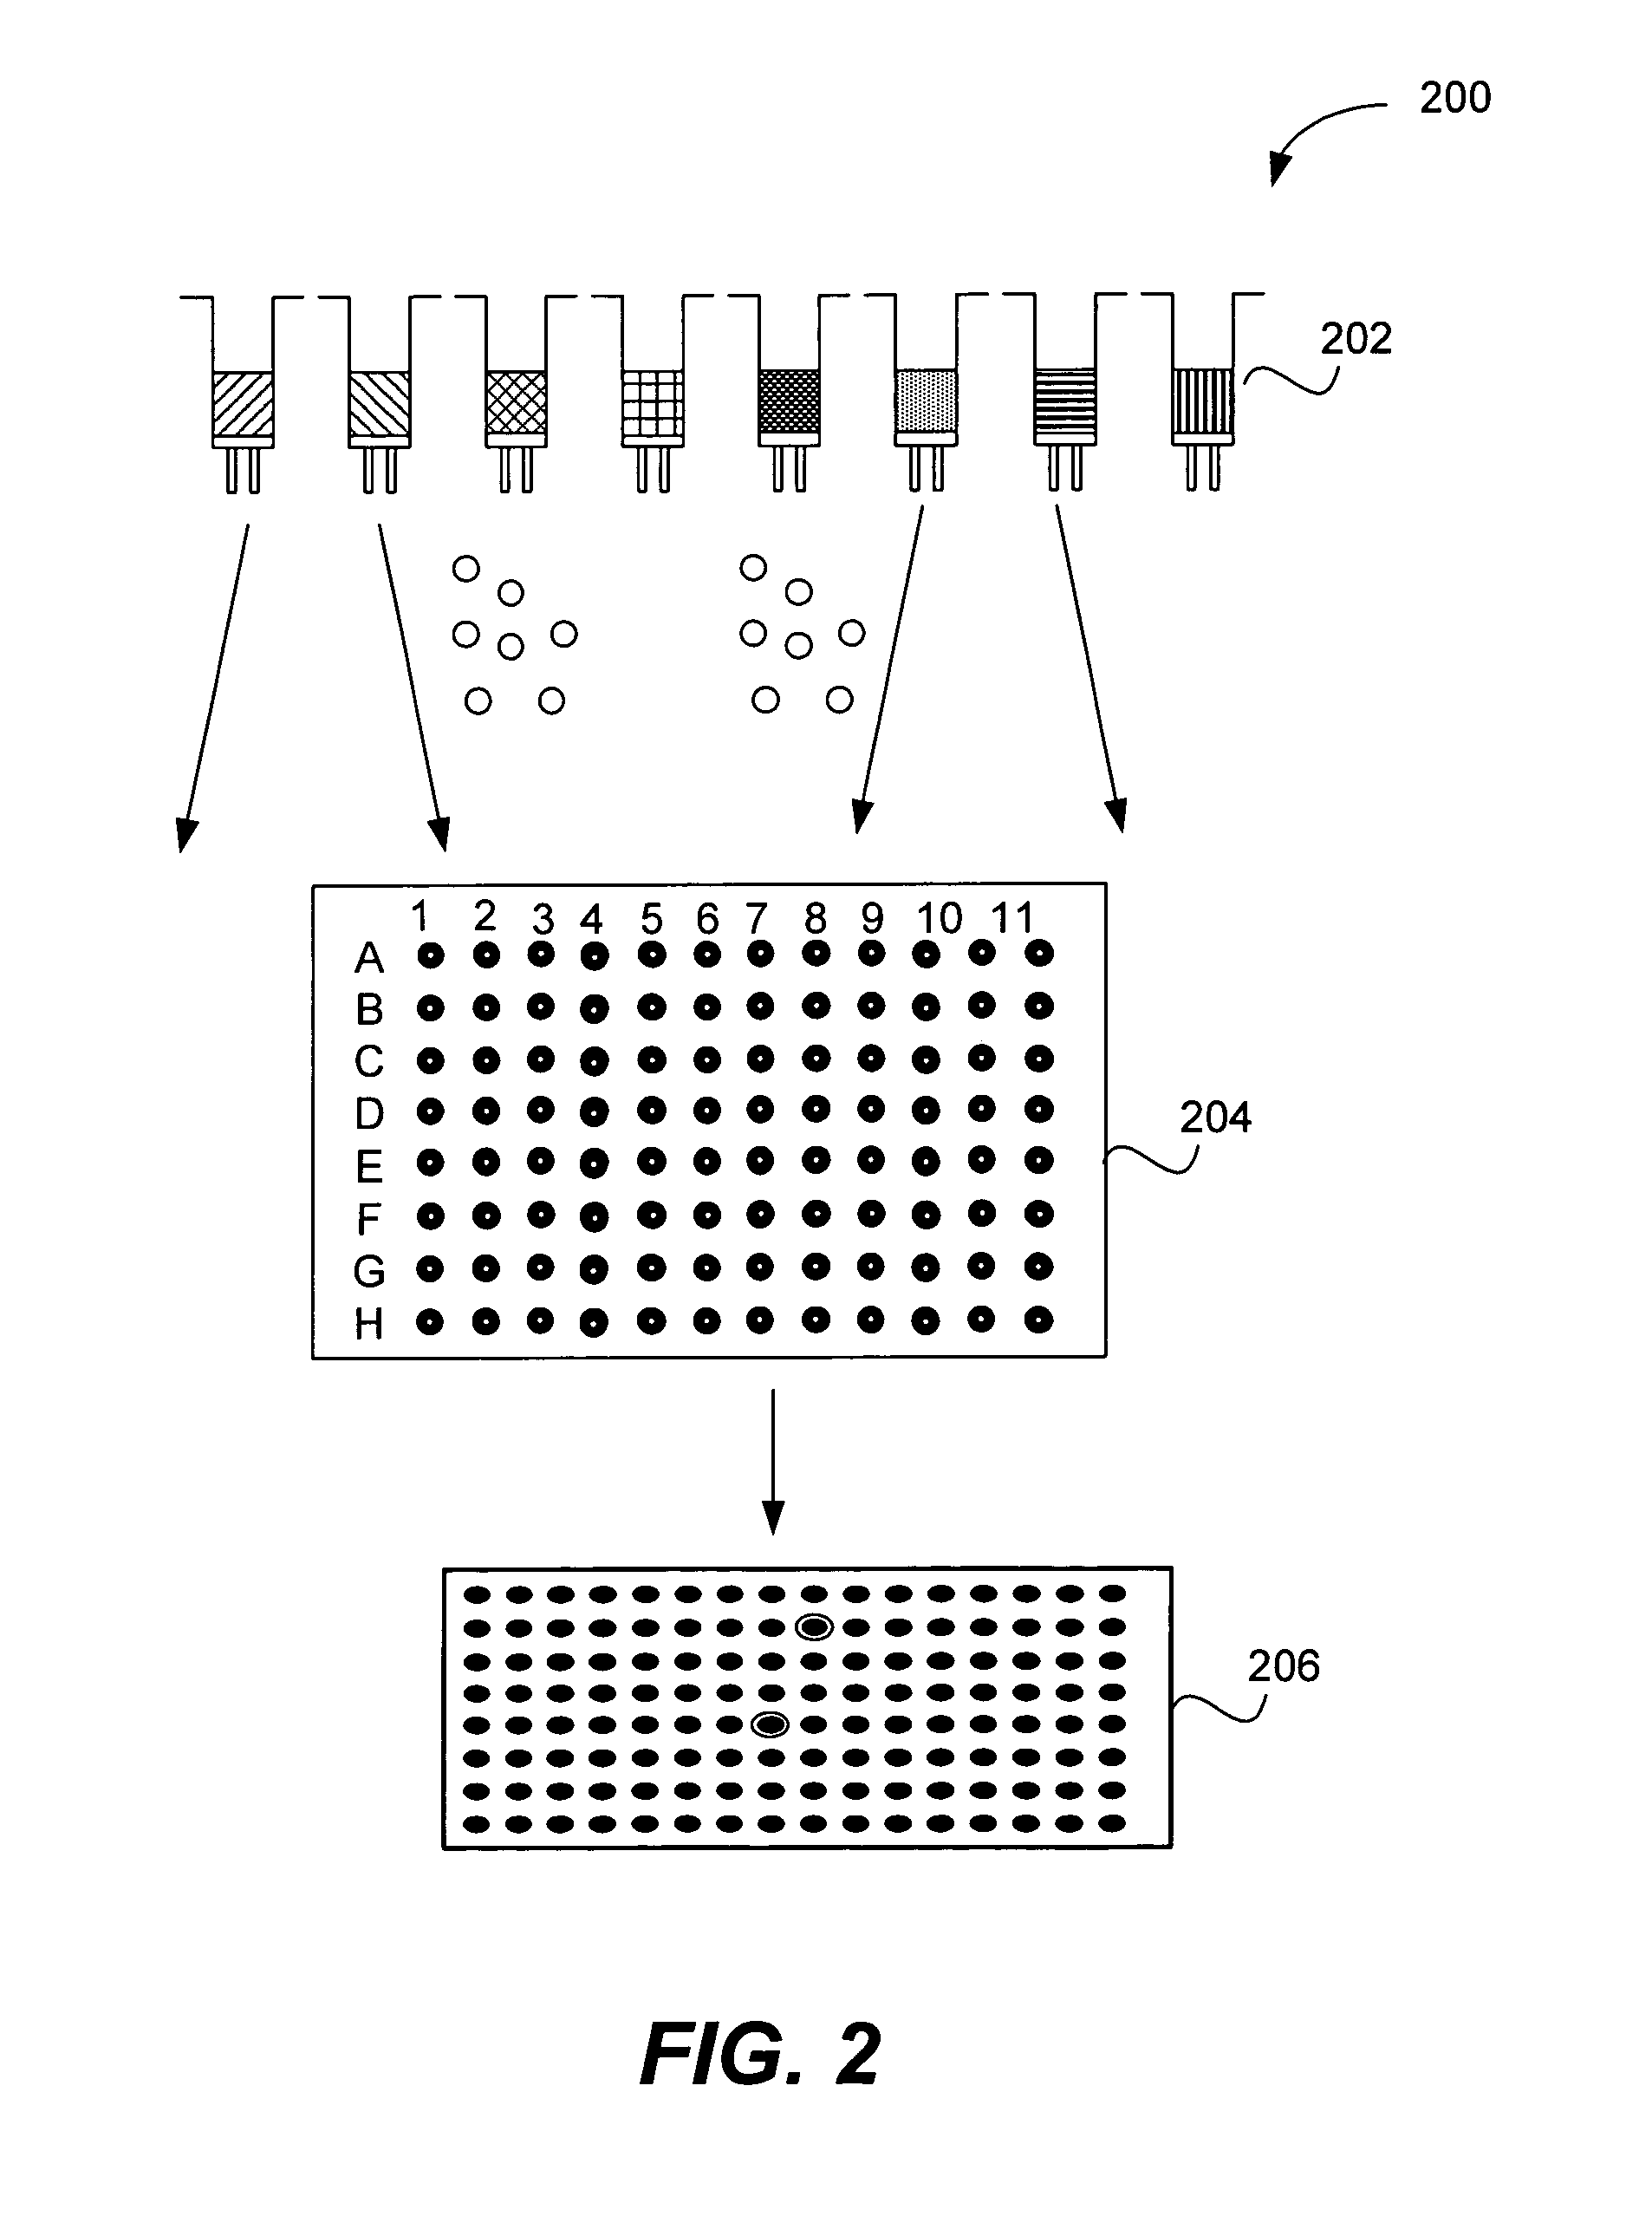 Microarrays on mirrored substrates for performing proteomic analyses